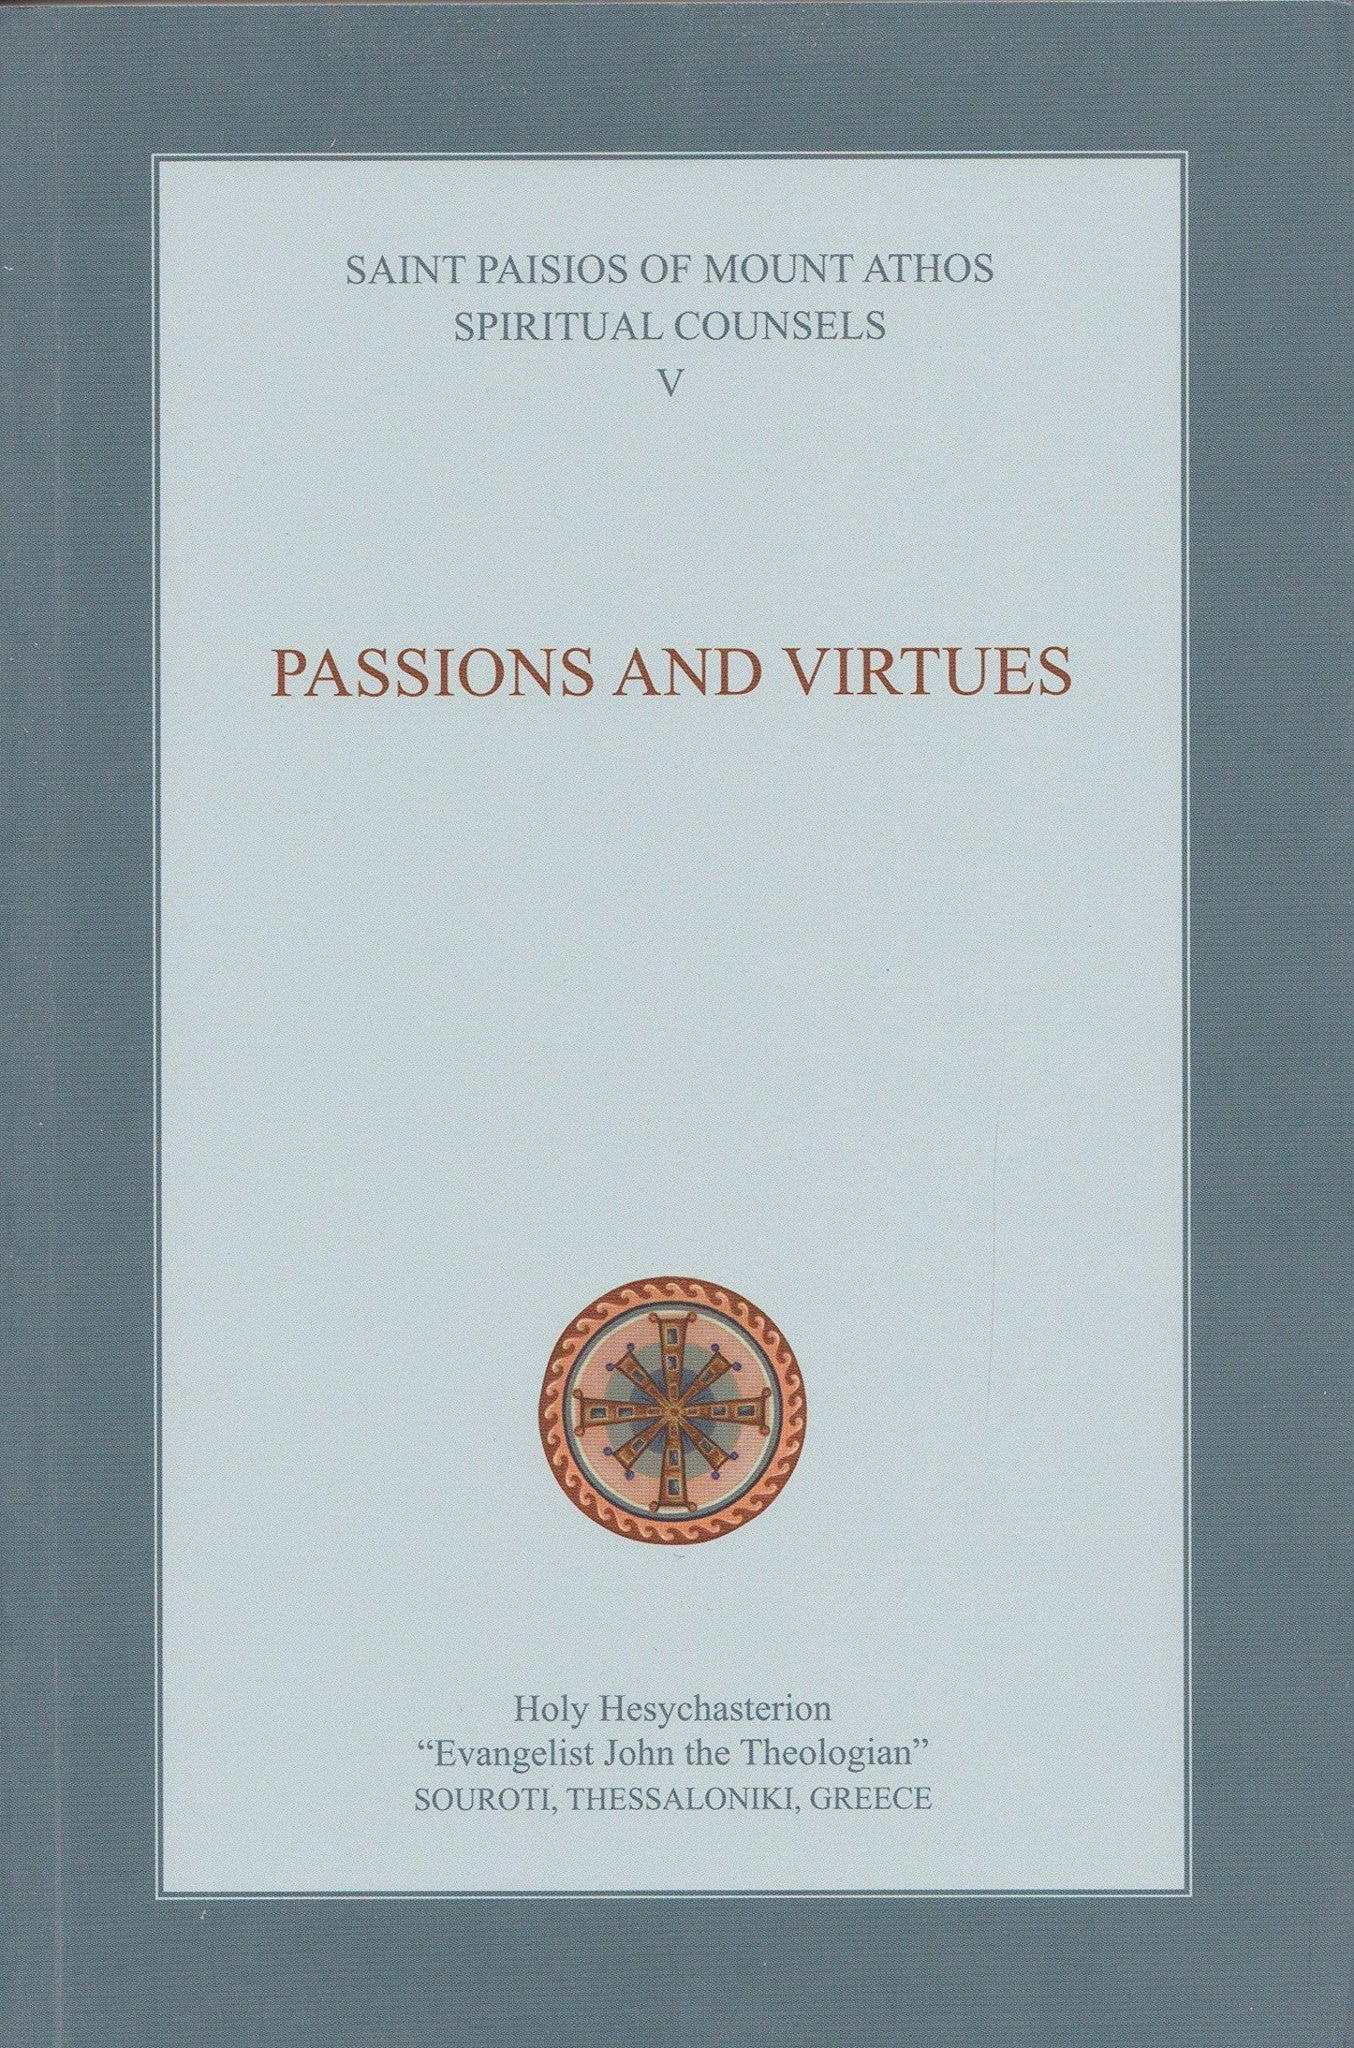 Vol. 5 - Passions and Virtues (Elder Paisios) - Holy Cross Monastery